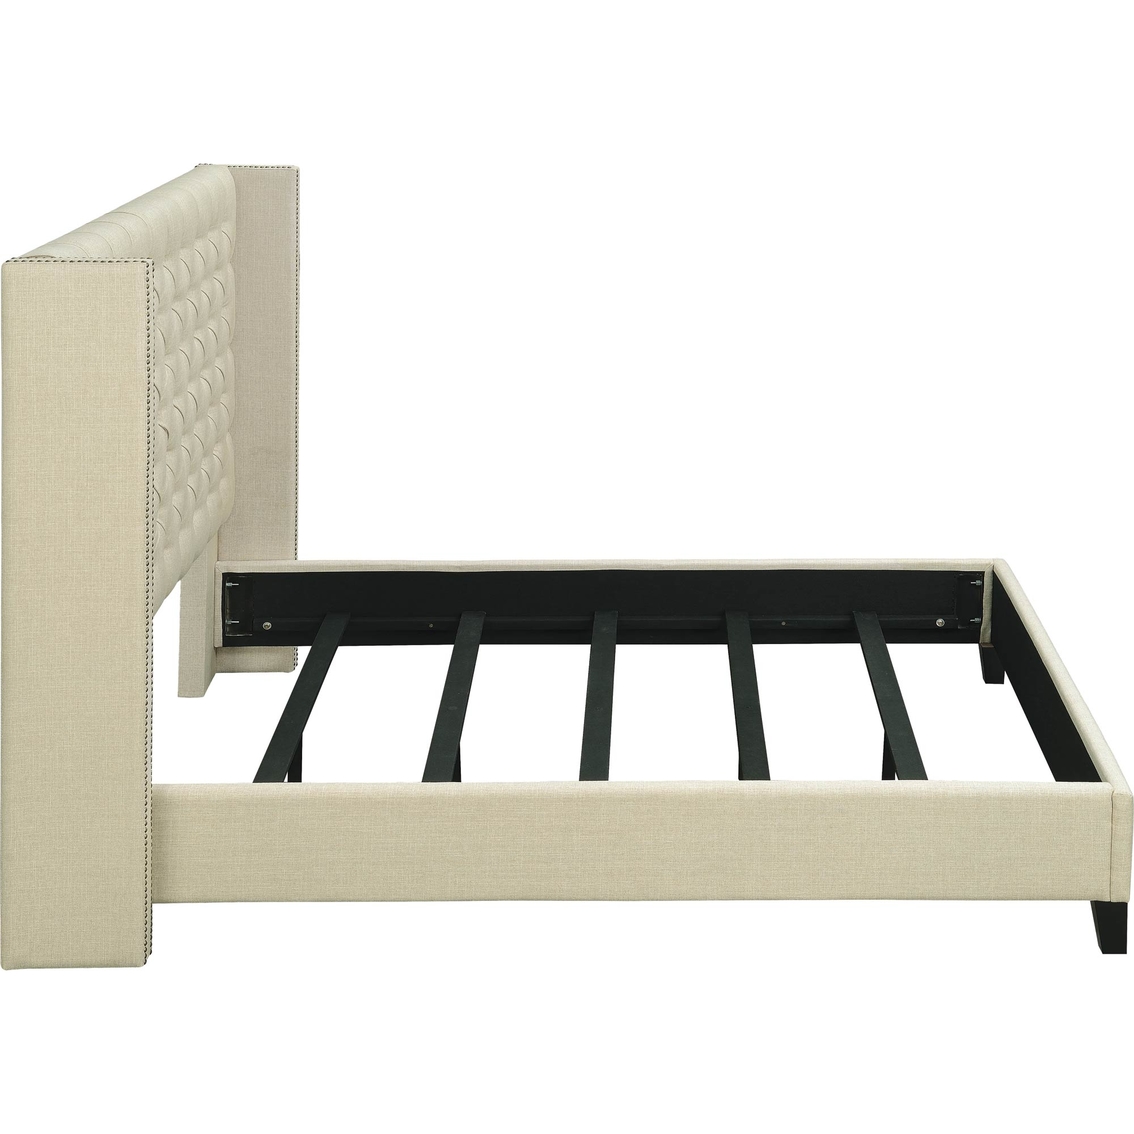 Coaster Benicia Tufted Upholstered Bed - Image 3 of 4